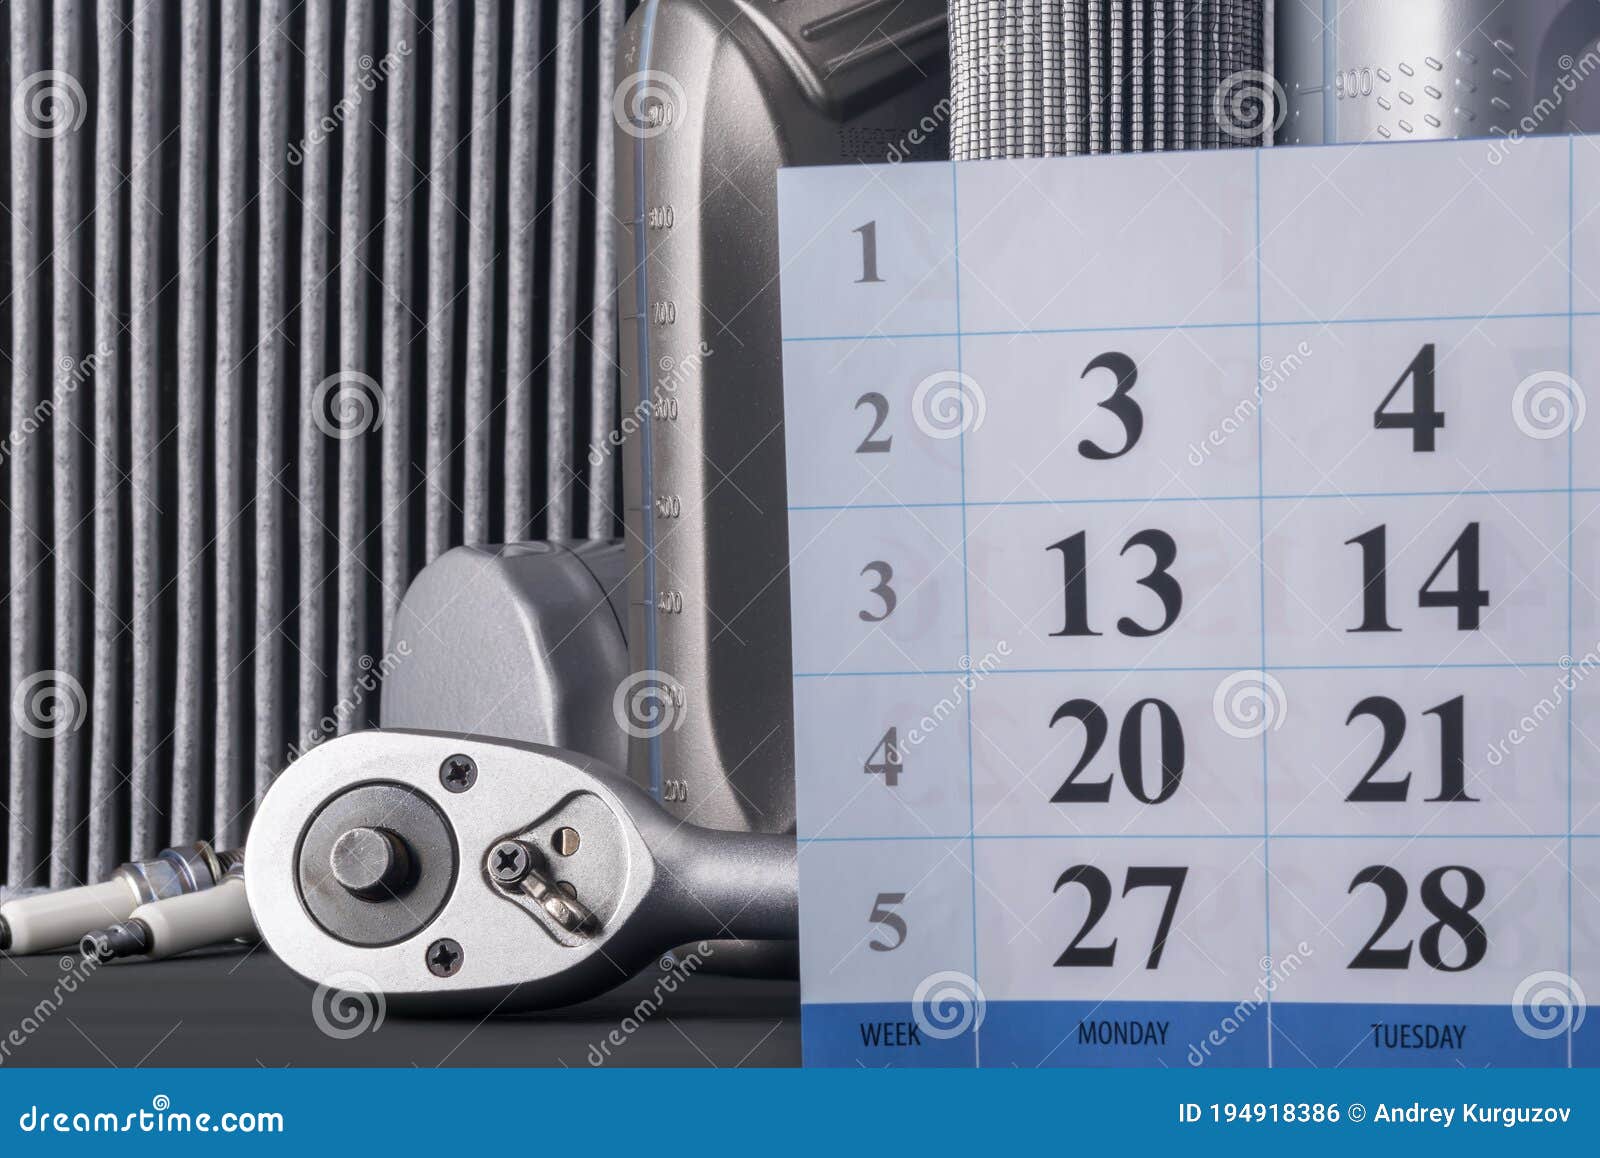 calendar with numbers for recording on car maintenance, consumables concept